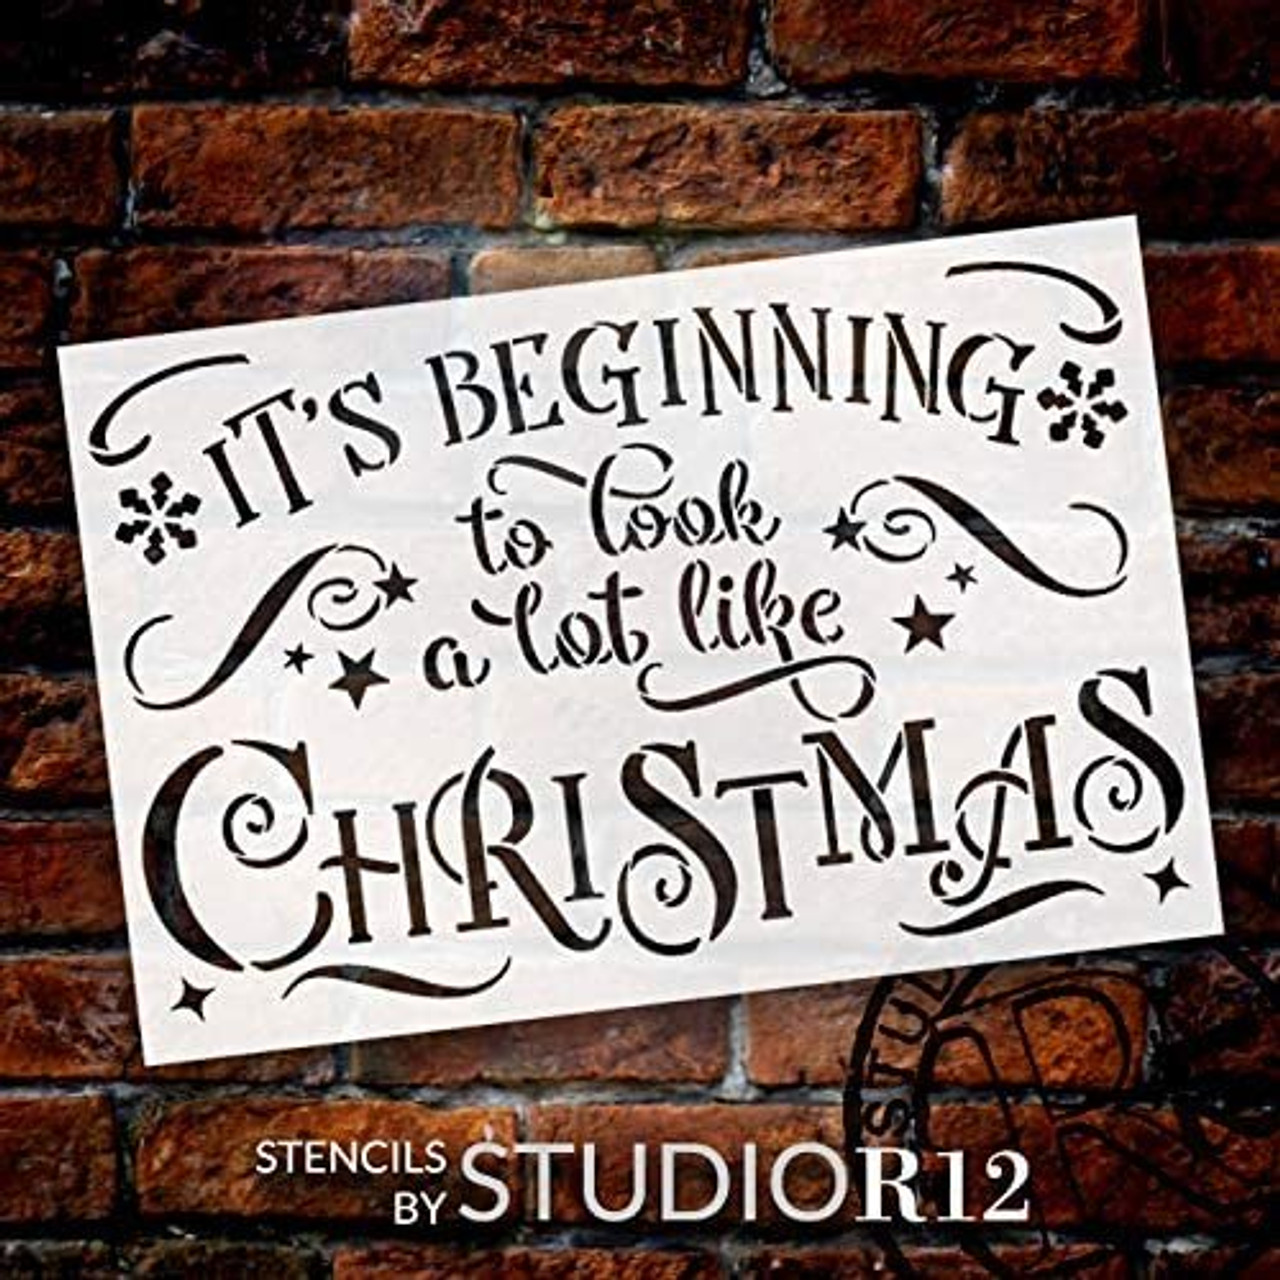 Beginning to Look Like Christmas Stencil by StudioR12 | DIY Holiday Song Home Decor | Craft & Paint Wood Sign Reusable Mylar Template Snowflake Cursive Script Gift Select Size